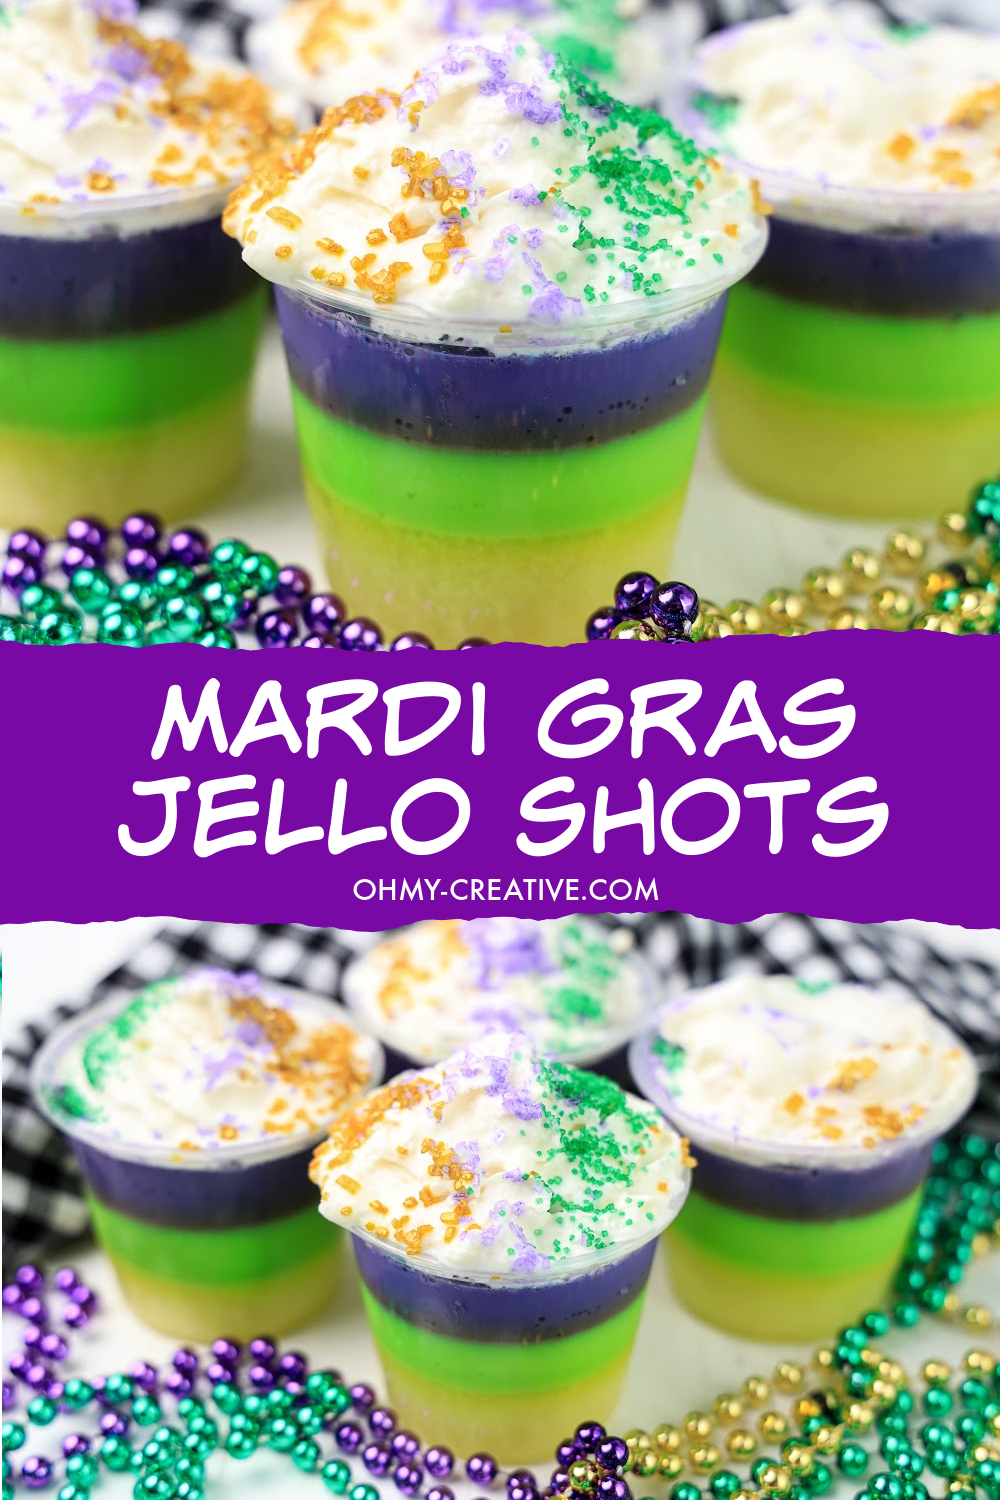 Layered purple, green and yellow Mardi Gras jello shots topped with whipped cream and purple, green and yellow sprinkles.